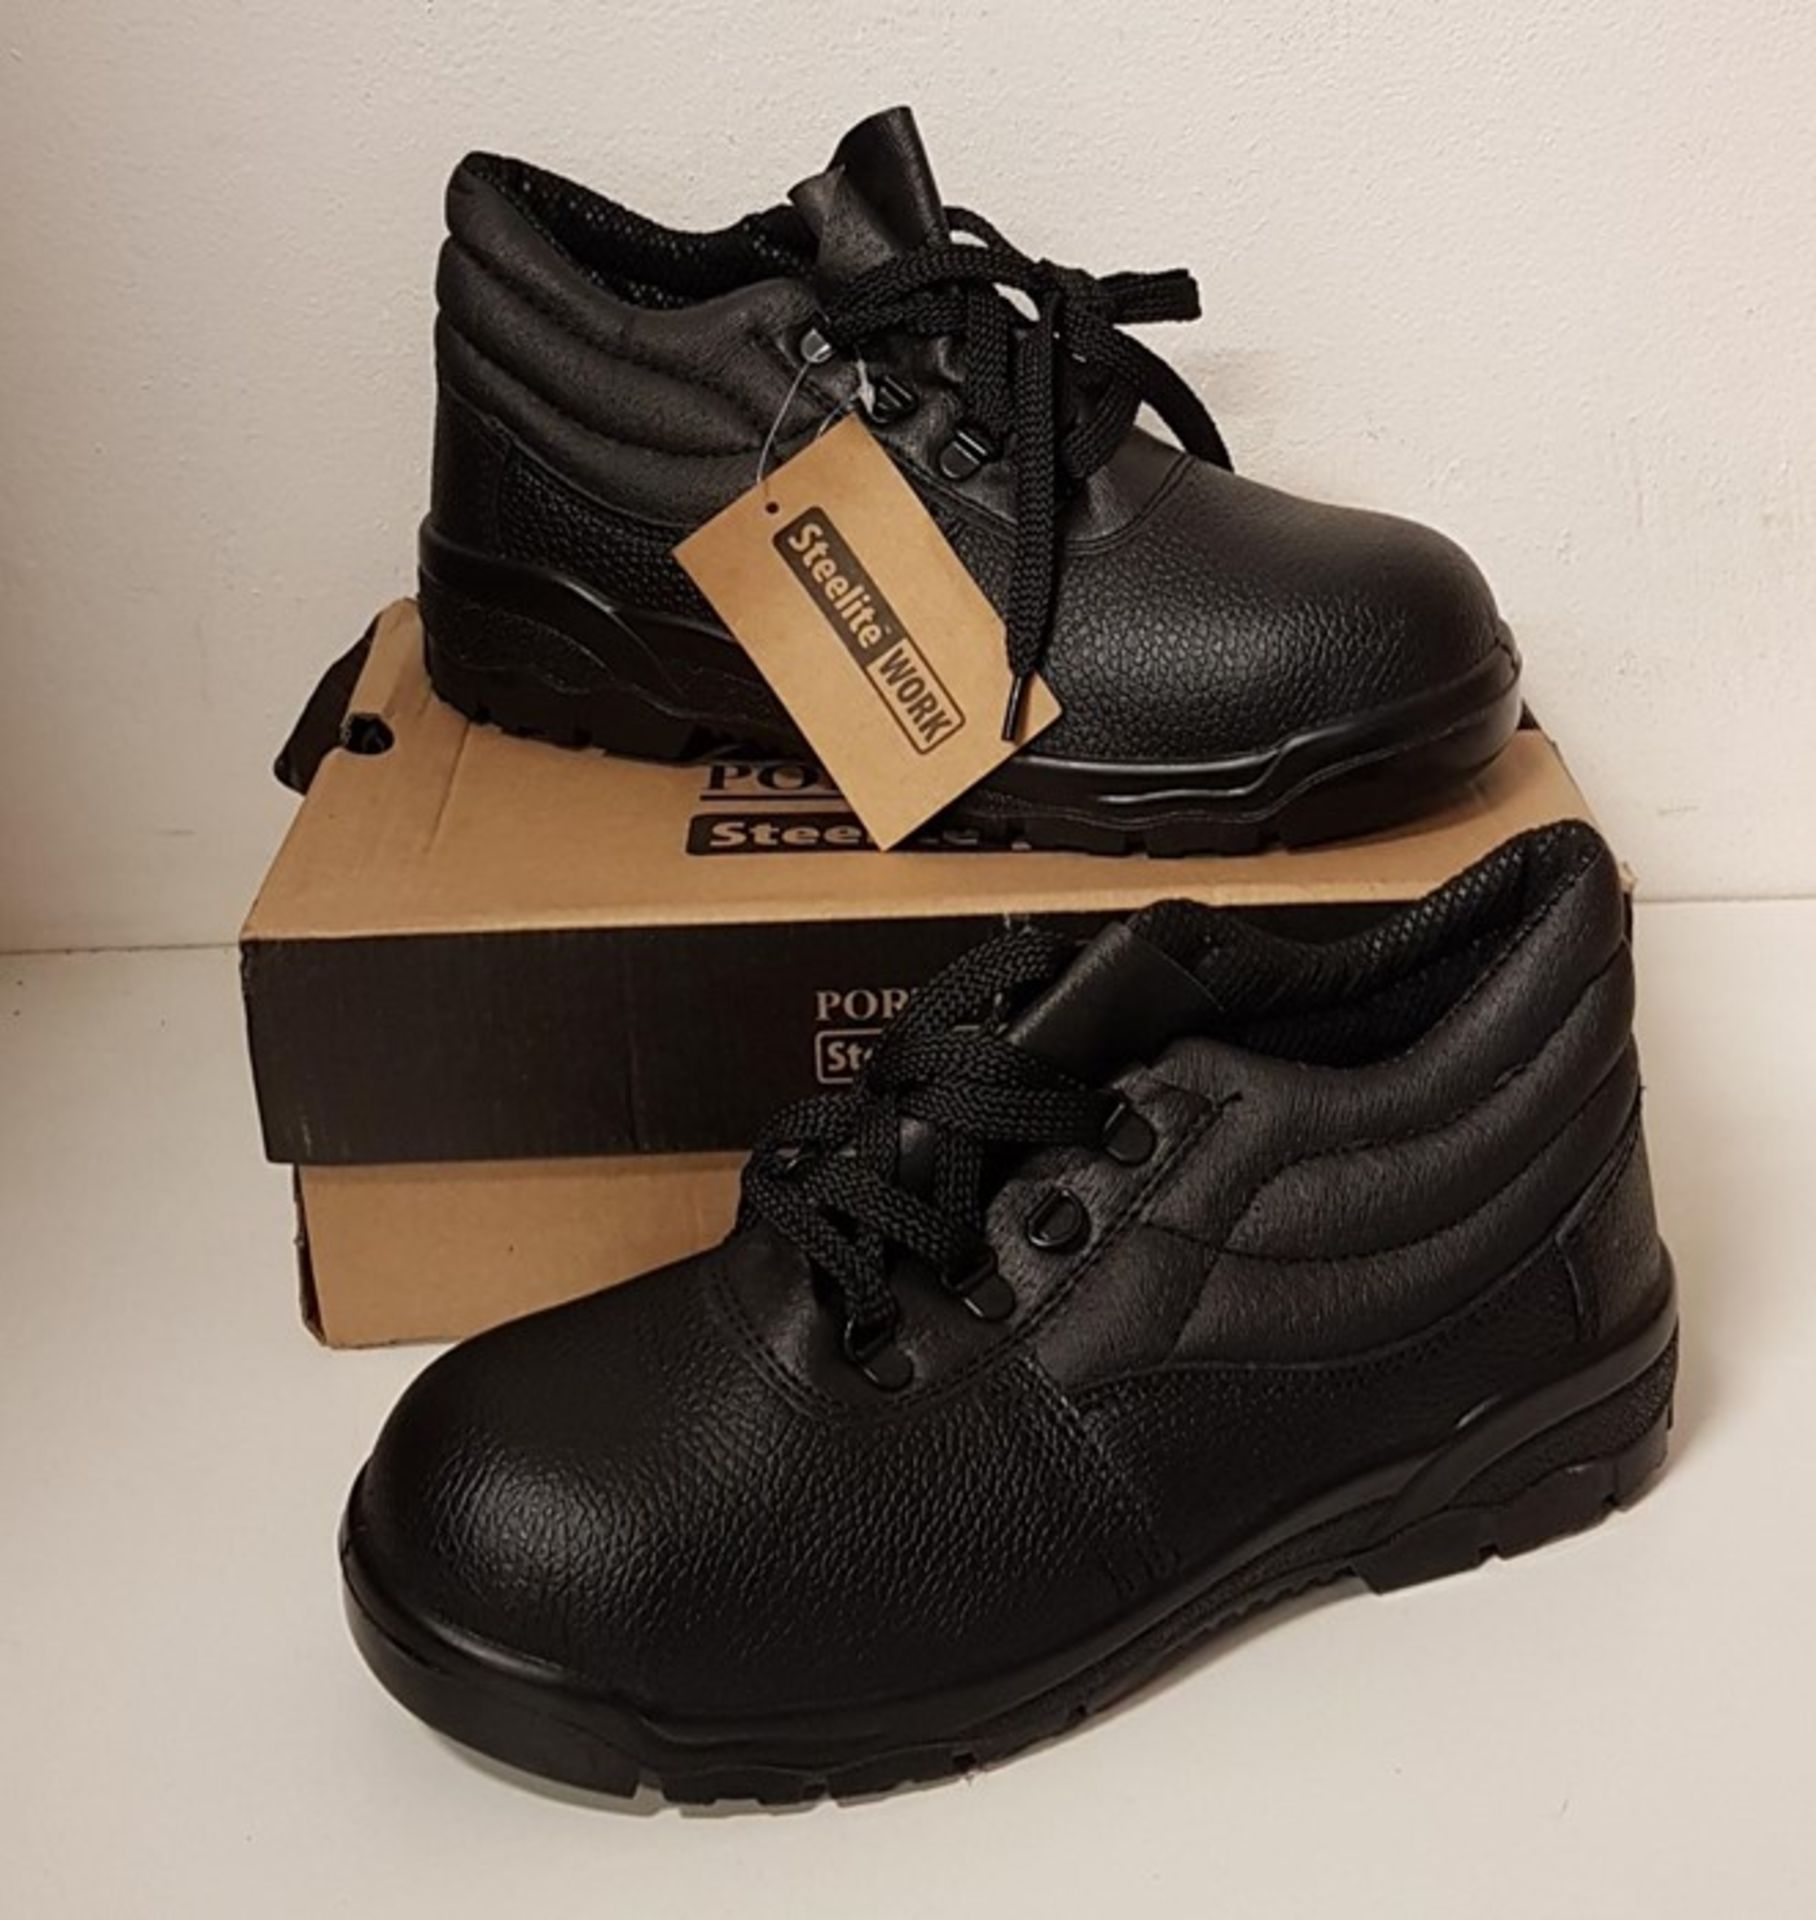 1 BOXED PAIR OF PORTWEST STEELITE WORK SAFETY BOOTS IN BLACK, SIZE 11 (VIEWING HIGHLY RECOMMENDED)